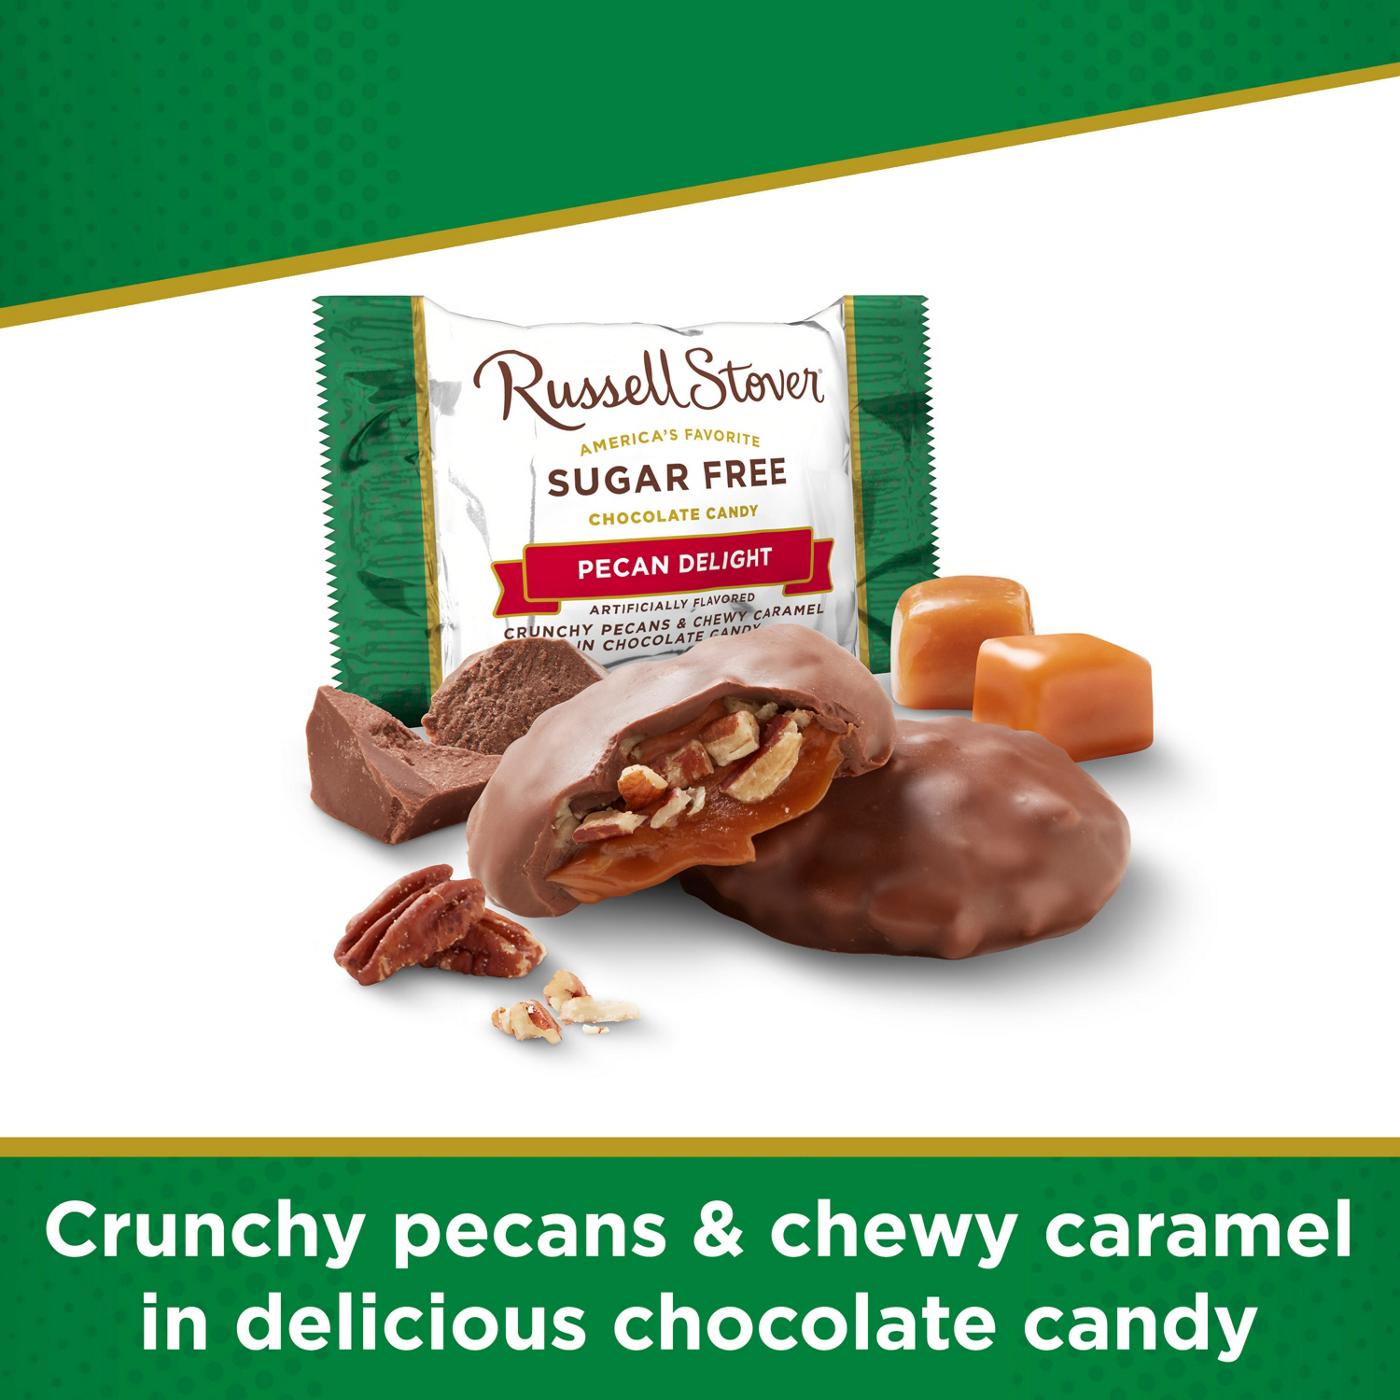 Russell Stover Sugar Free Pecan Delights; image 4 of 8